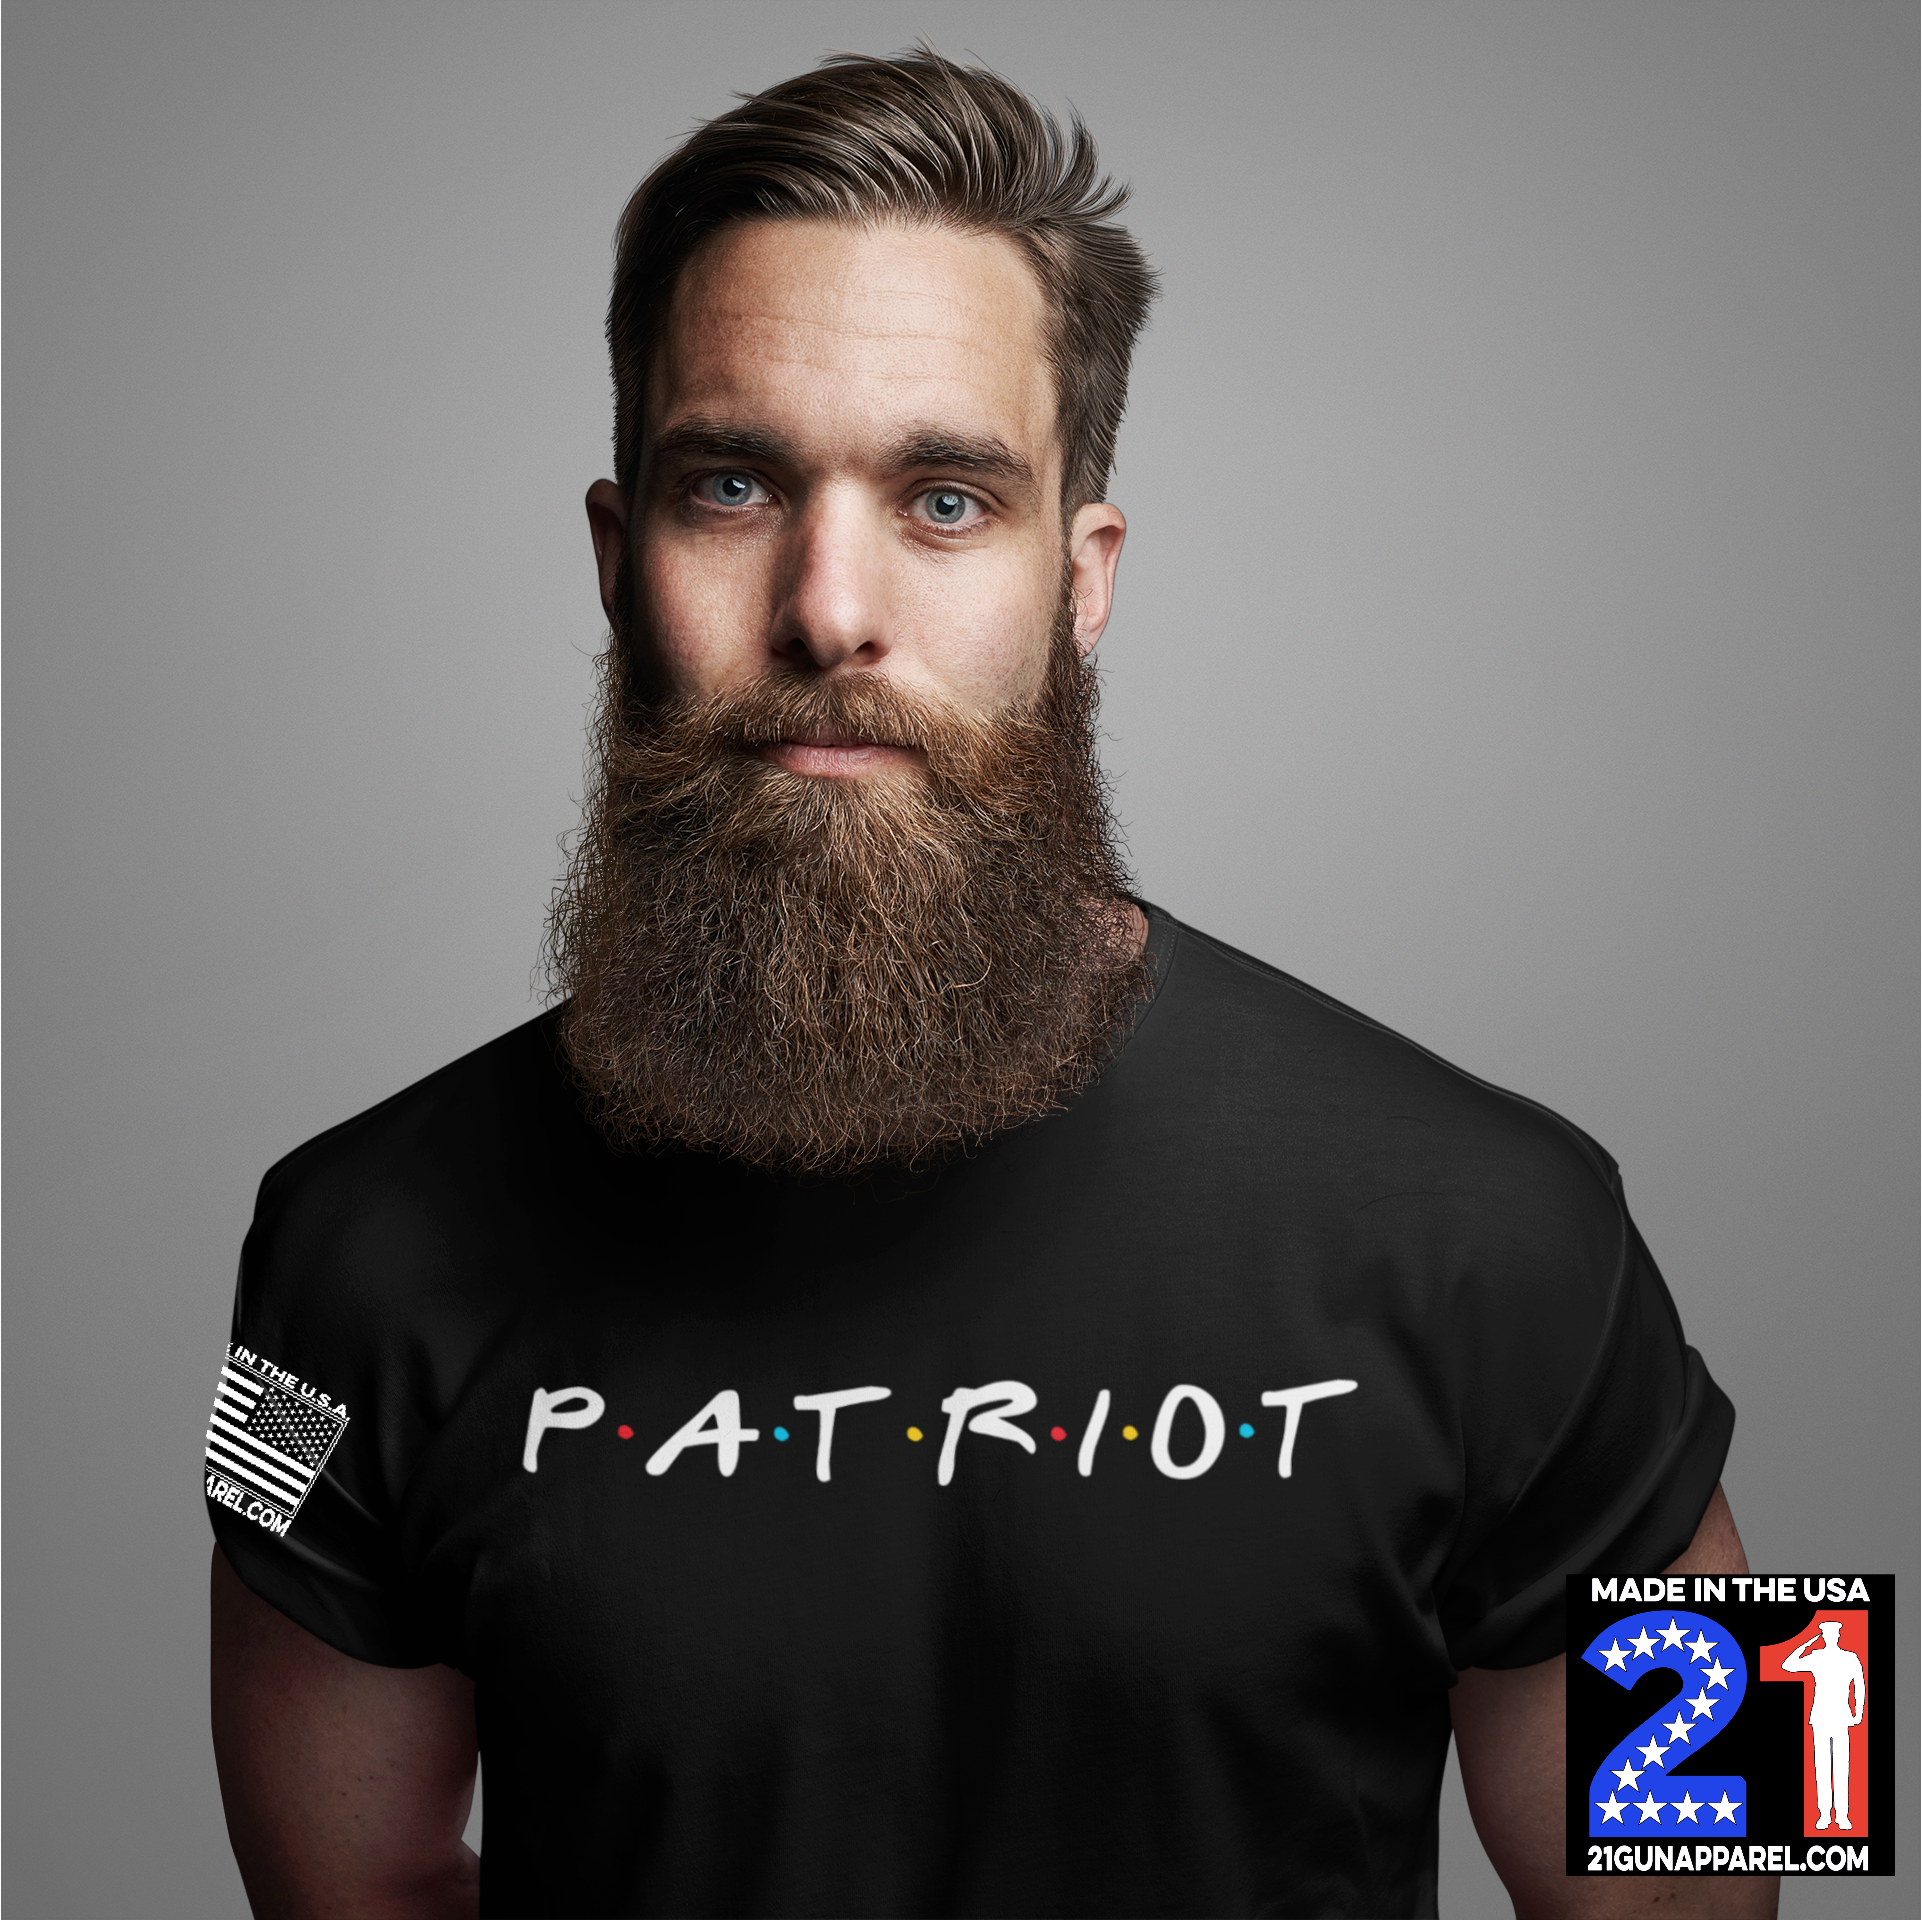 The One With The Patriot T-shirt